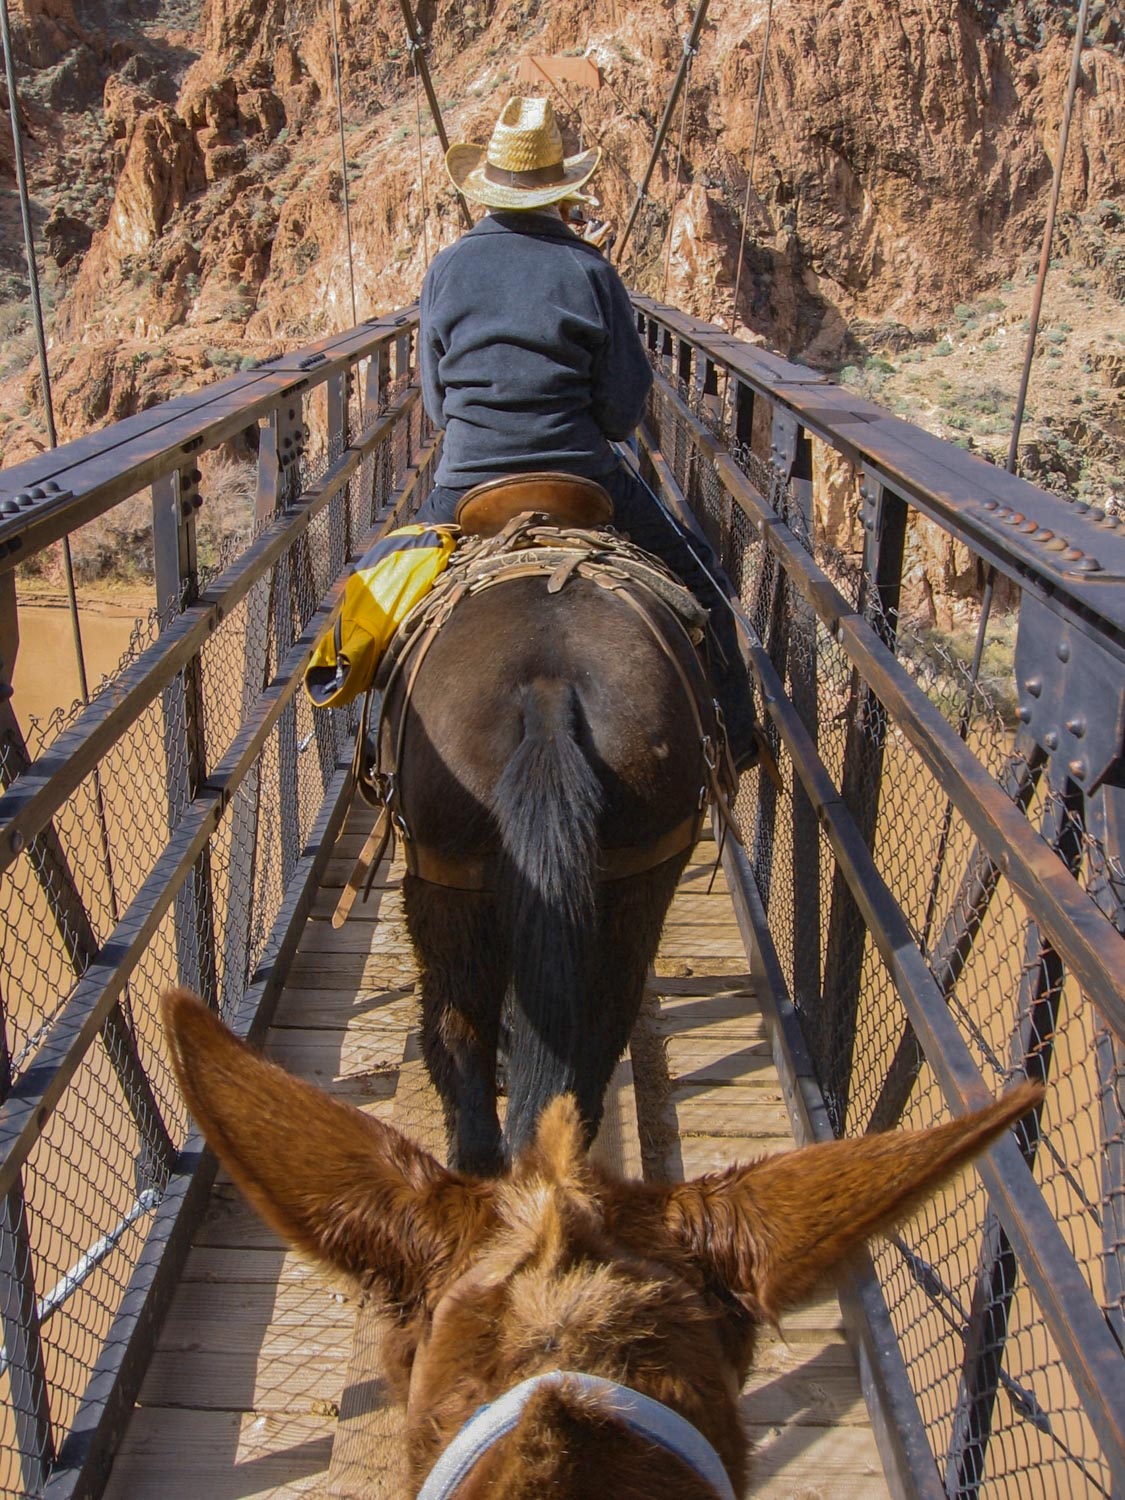 Mule rides are an effective way to see the Canyon © melpilgrim / Budget Travel 